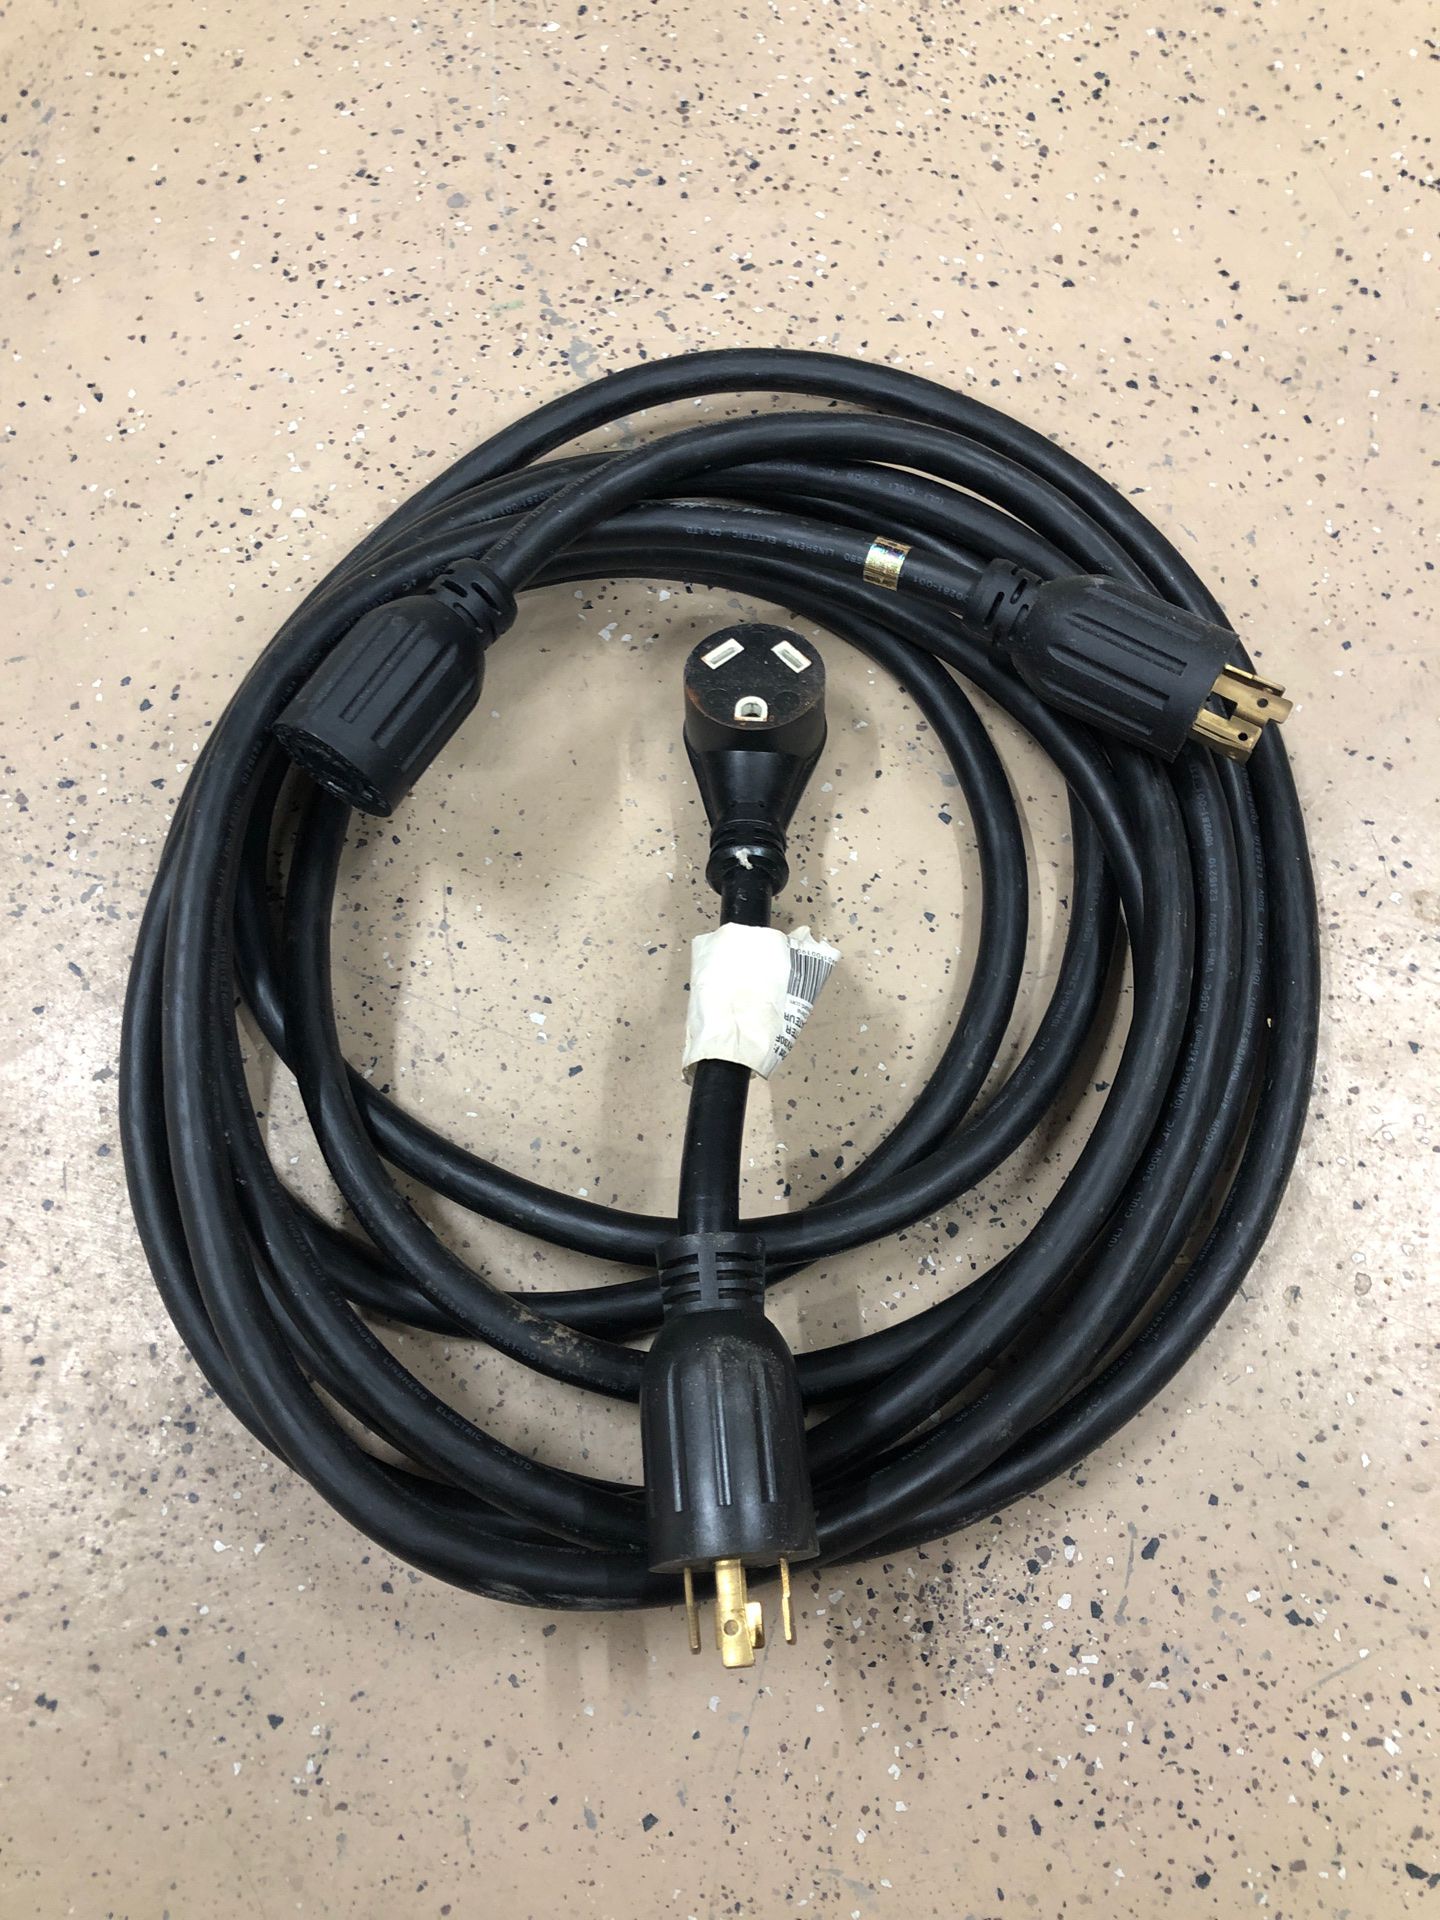 24’ generator cable plus an RV adapter